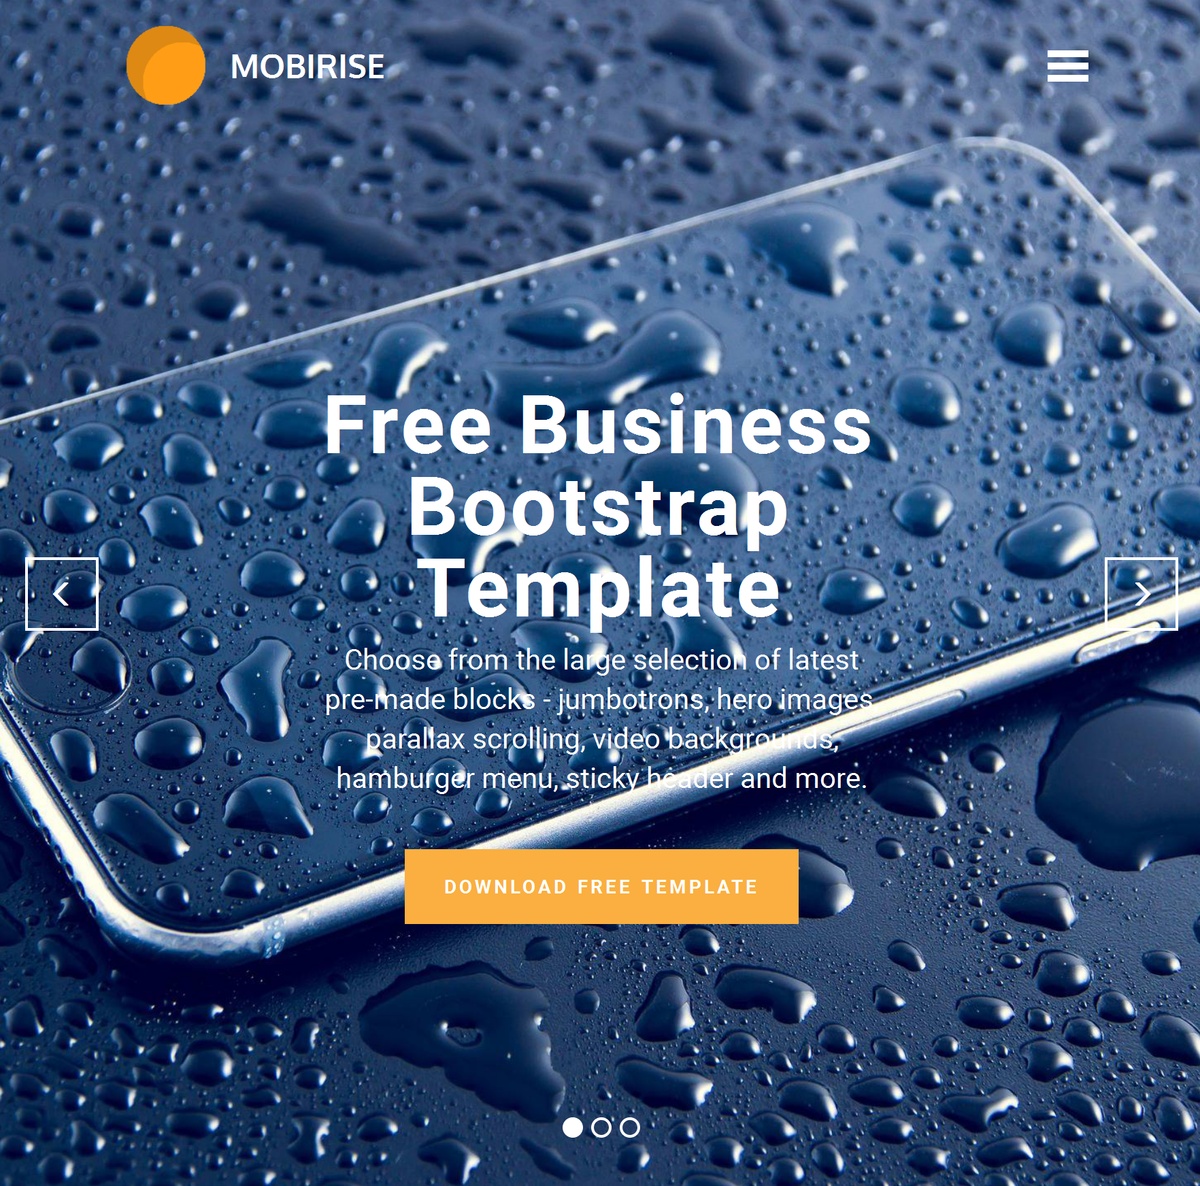 Simple Responsive Website Templates Themes Extensions